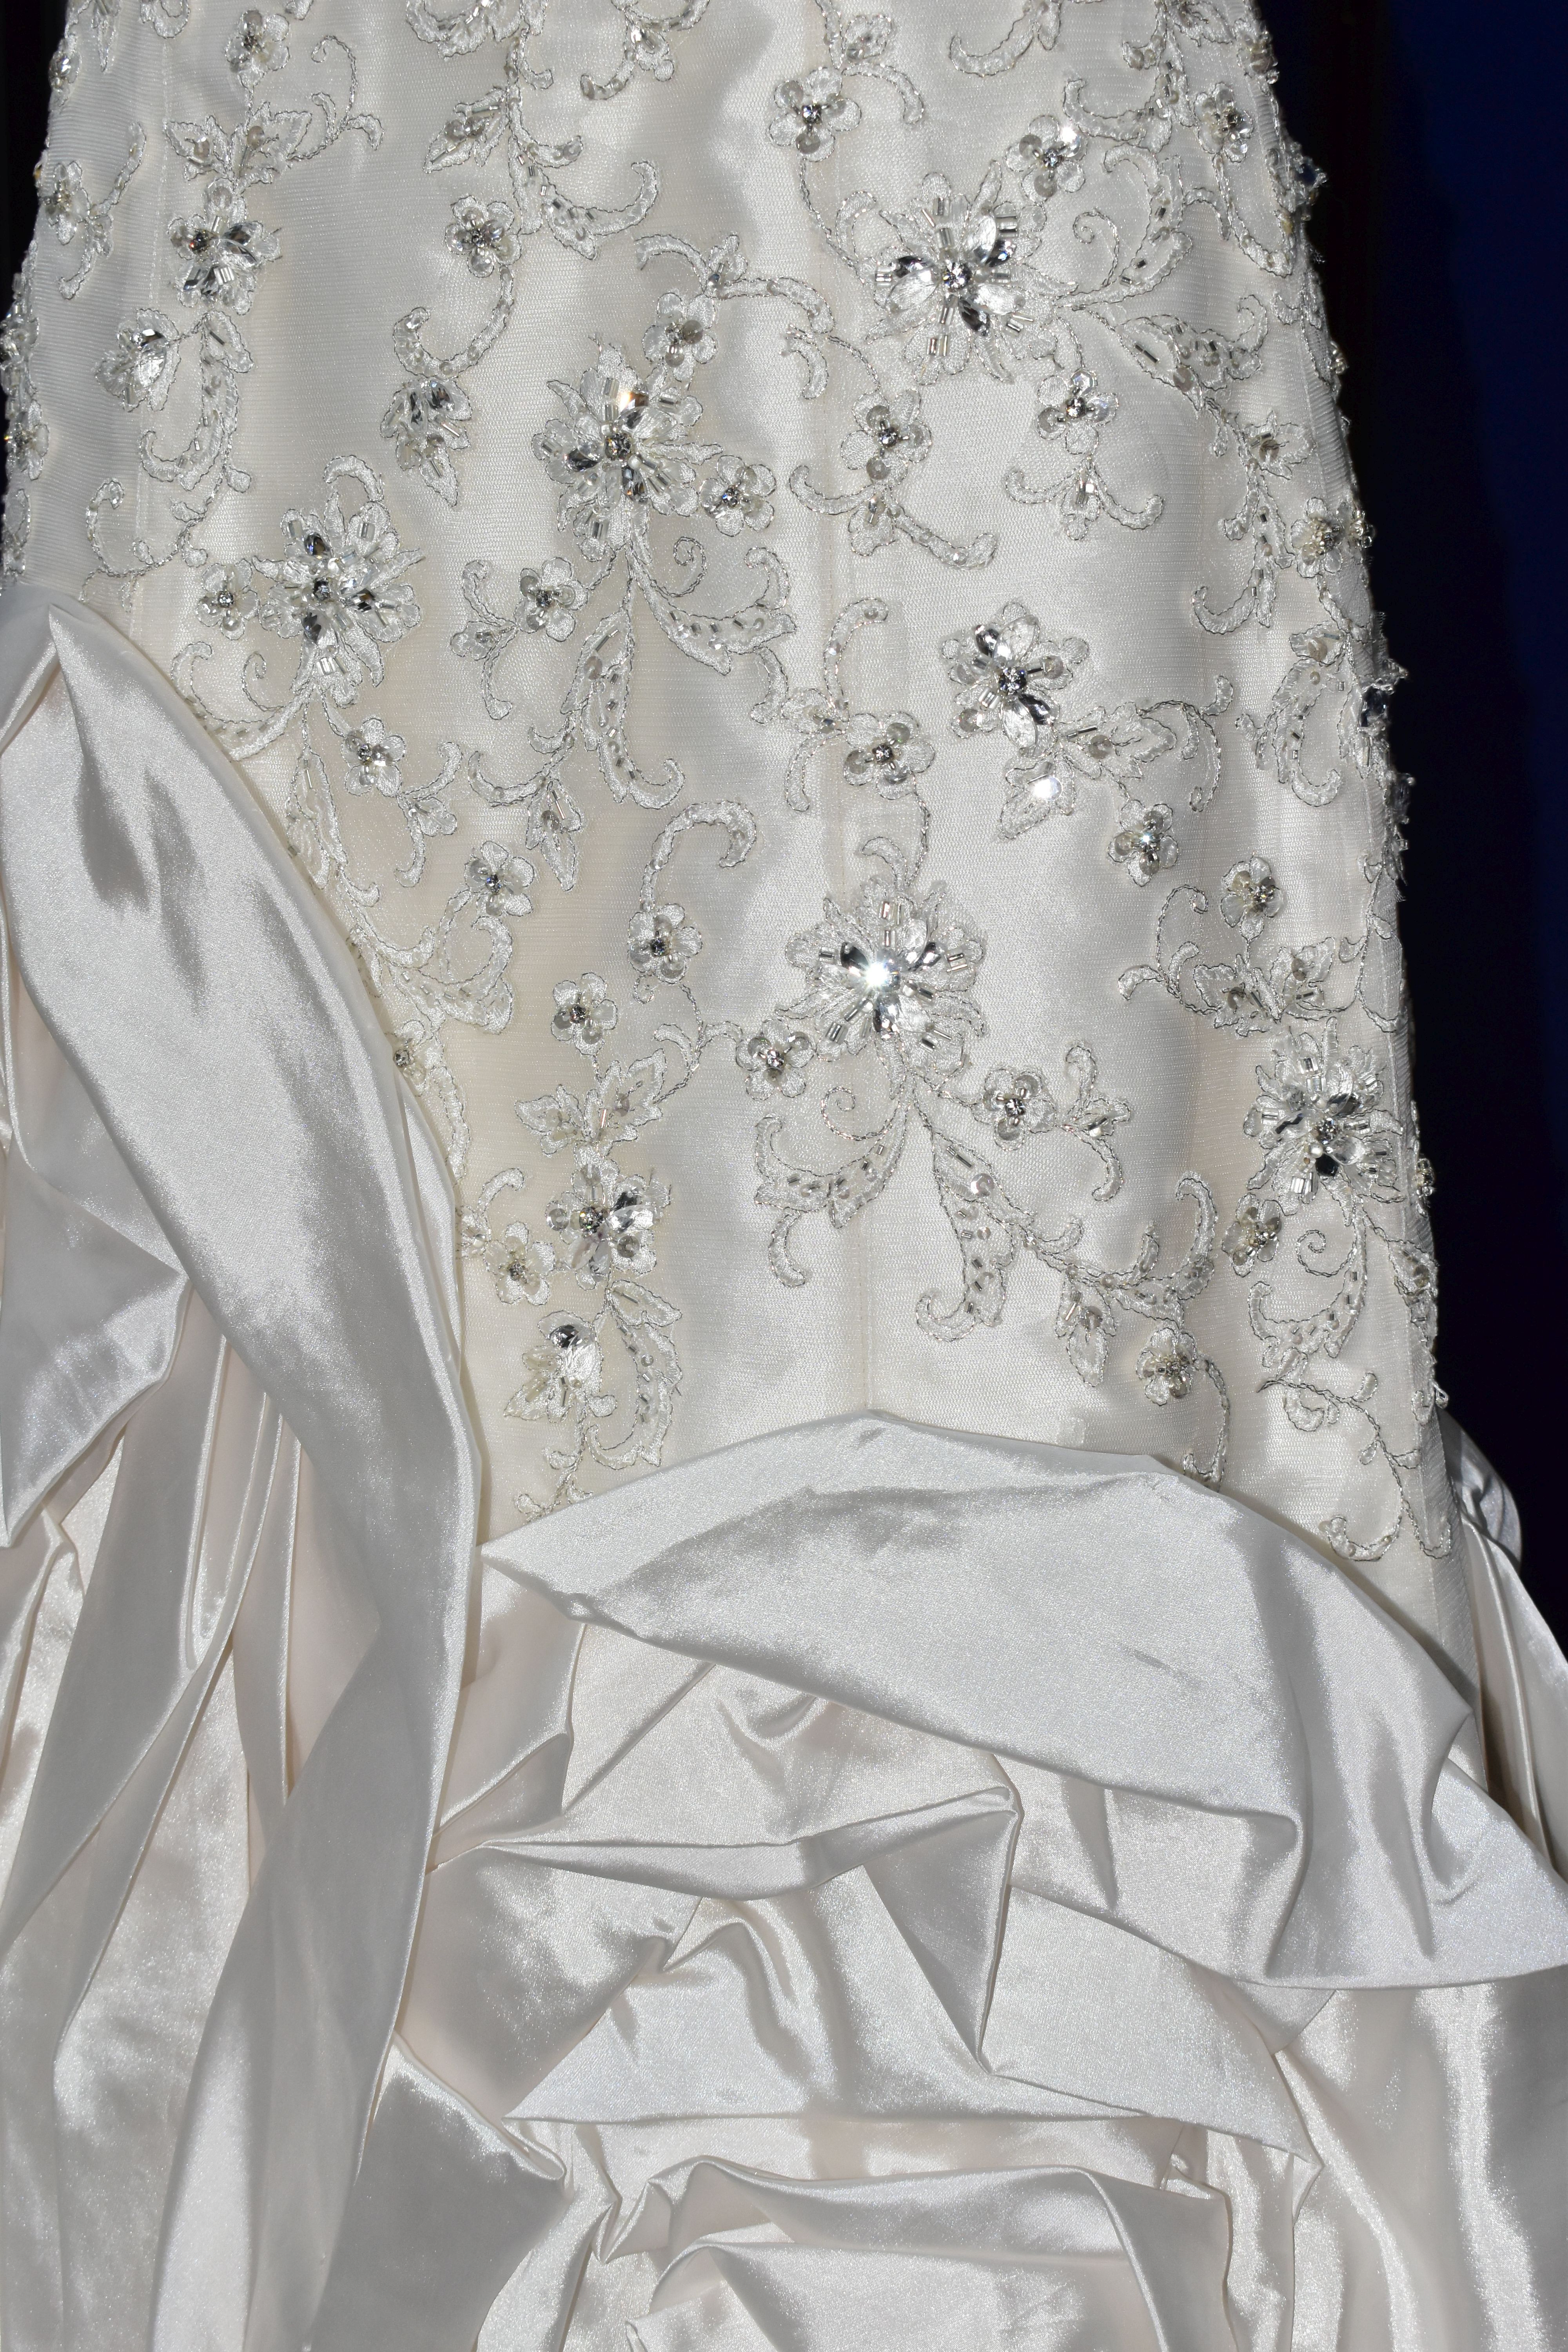 WEDDING GOWN, 'Sophia Tolli', size 10, champagne with satin bodice, pewter beaded appliques (1) - Image 5 of 13